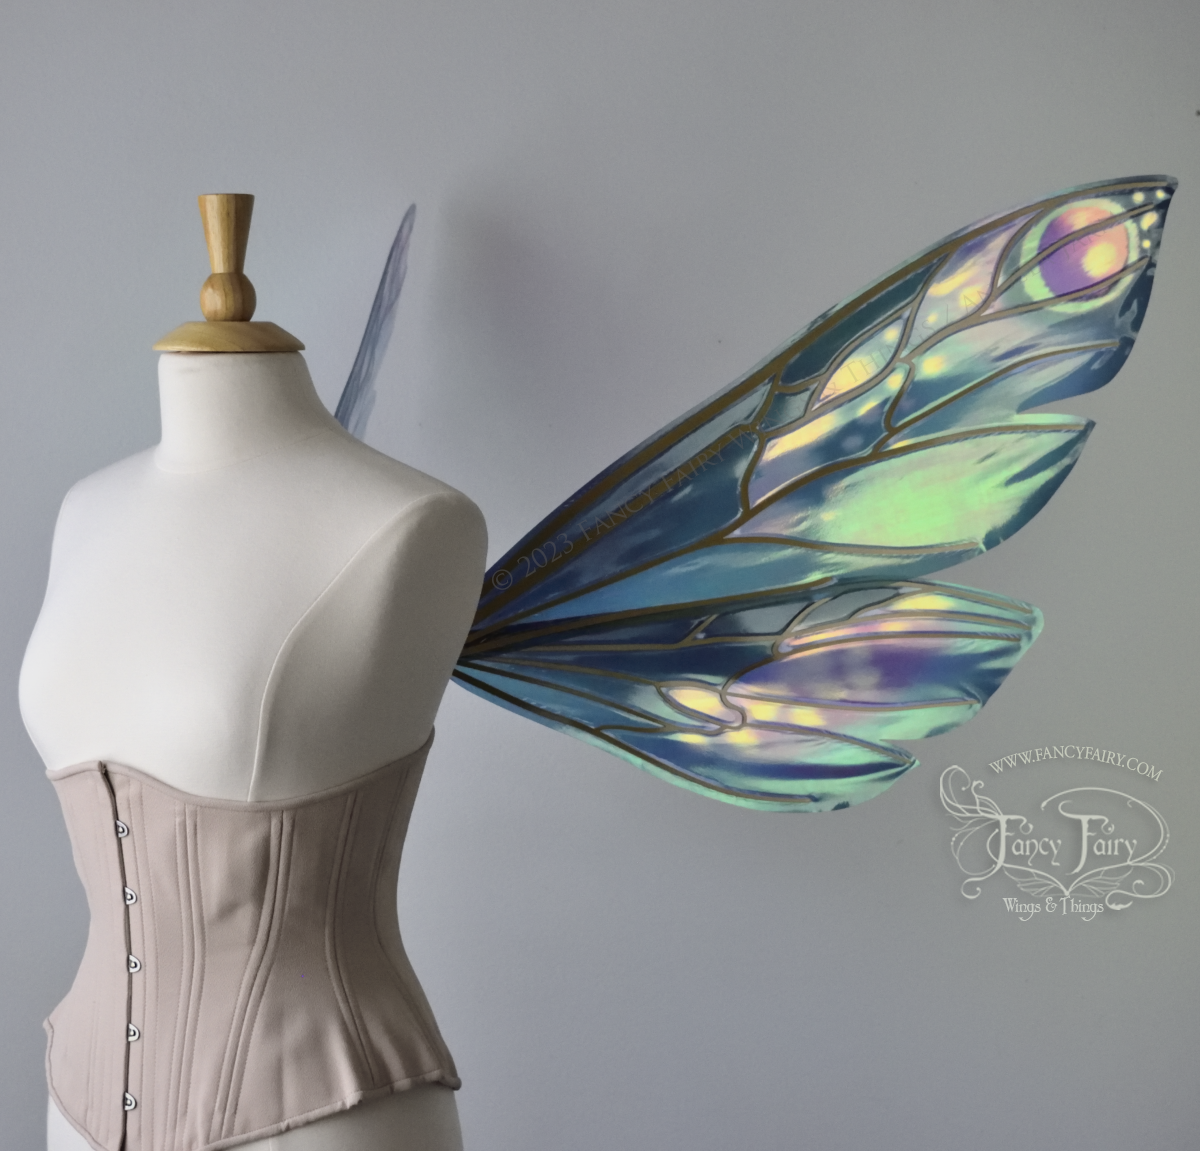 Right side view of extra large iridescent fairy wings in various shades of green, teal, blue, lavender with touches of pink, with gold veins, worn on a dress form with underbust corset